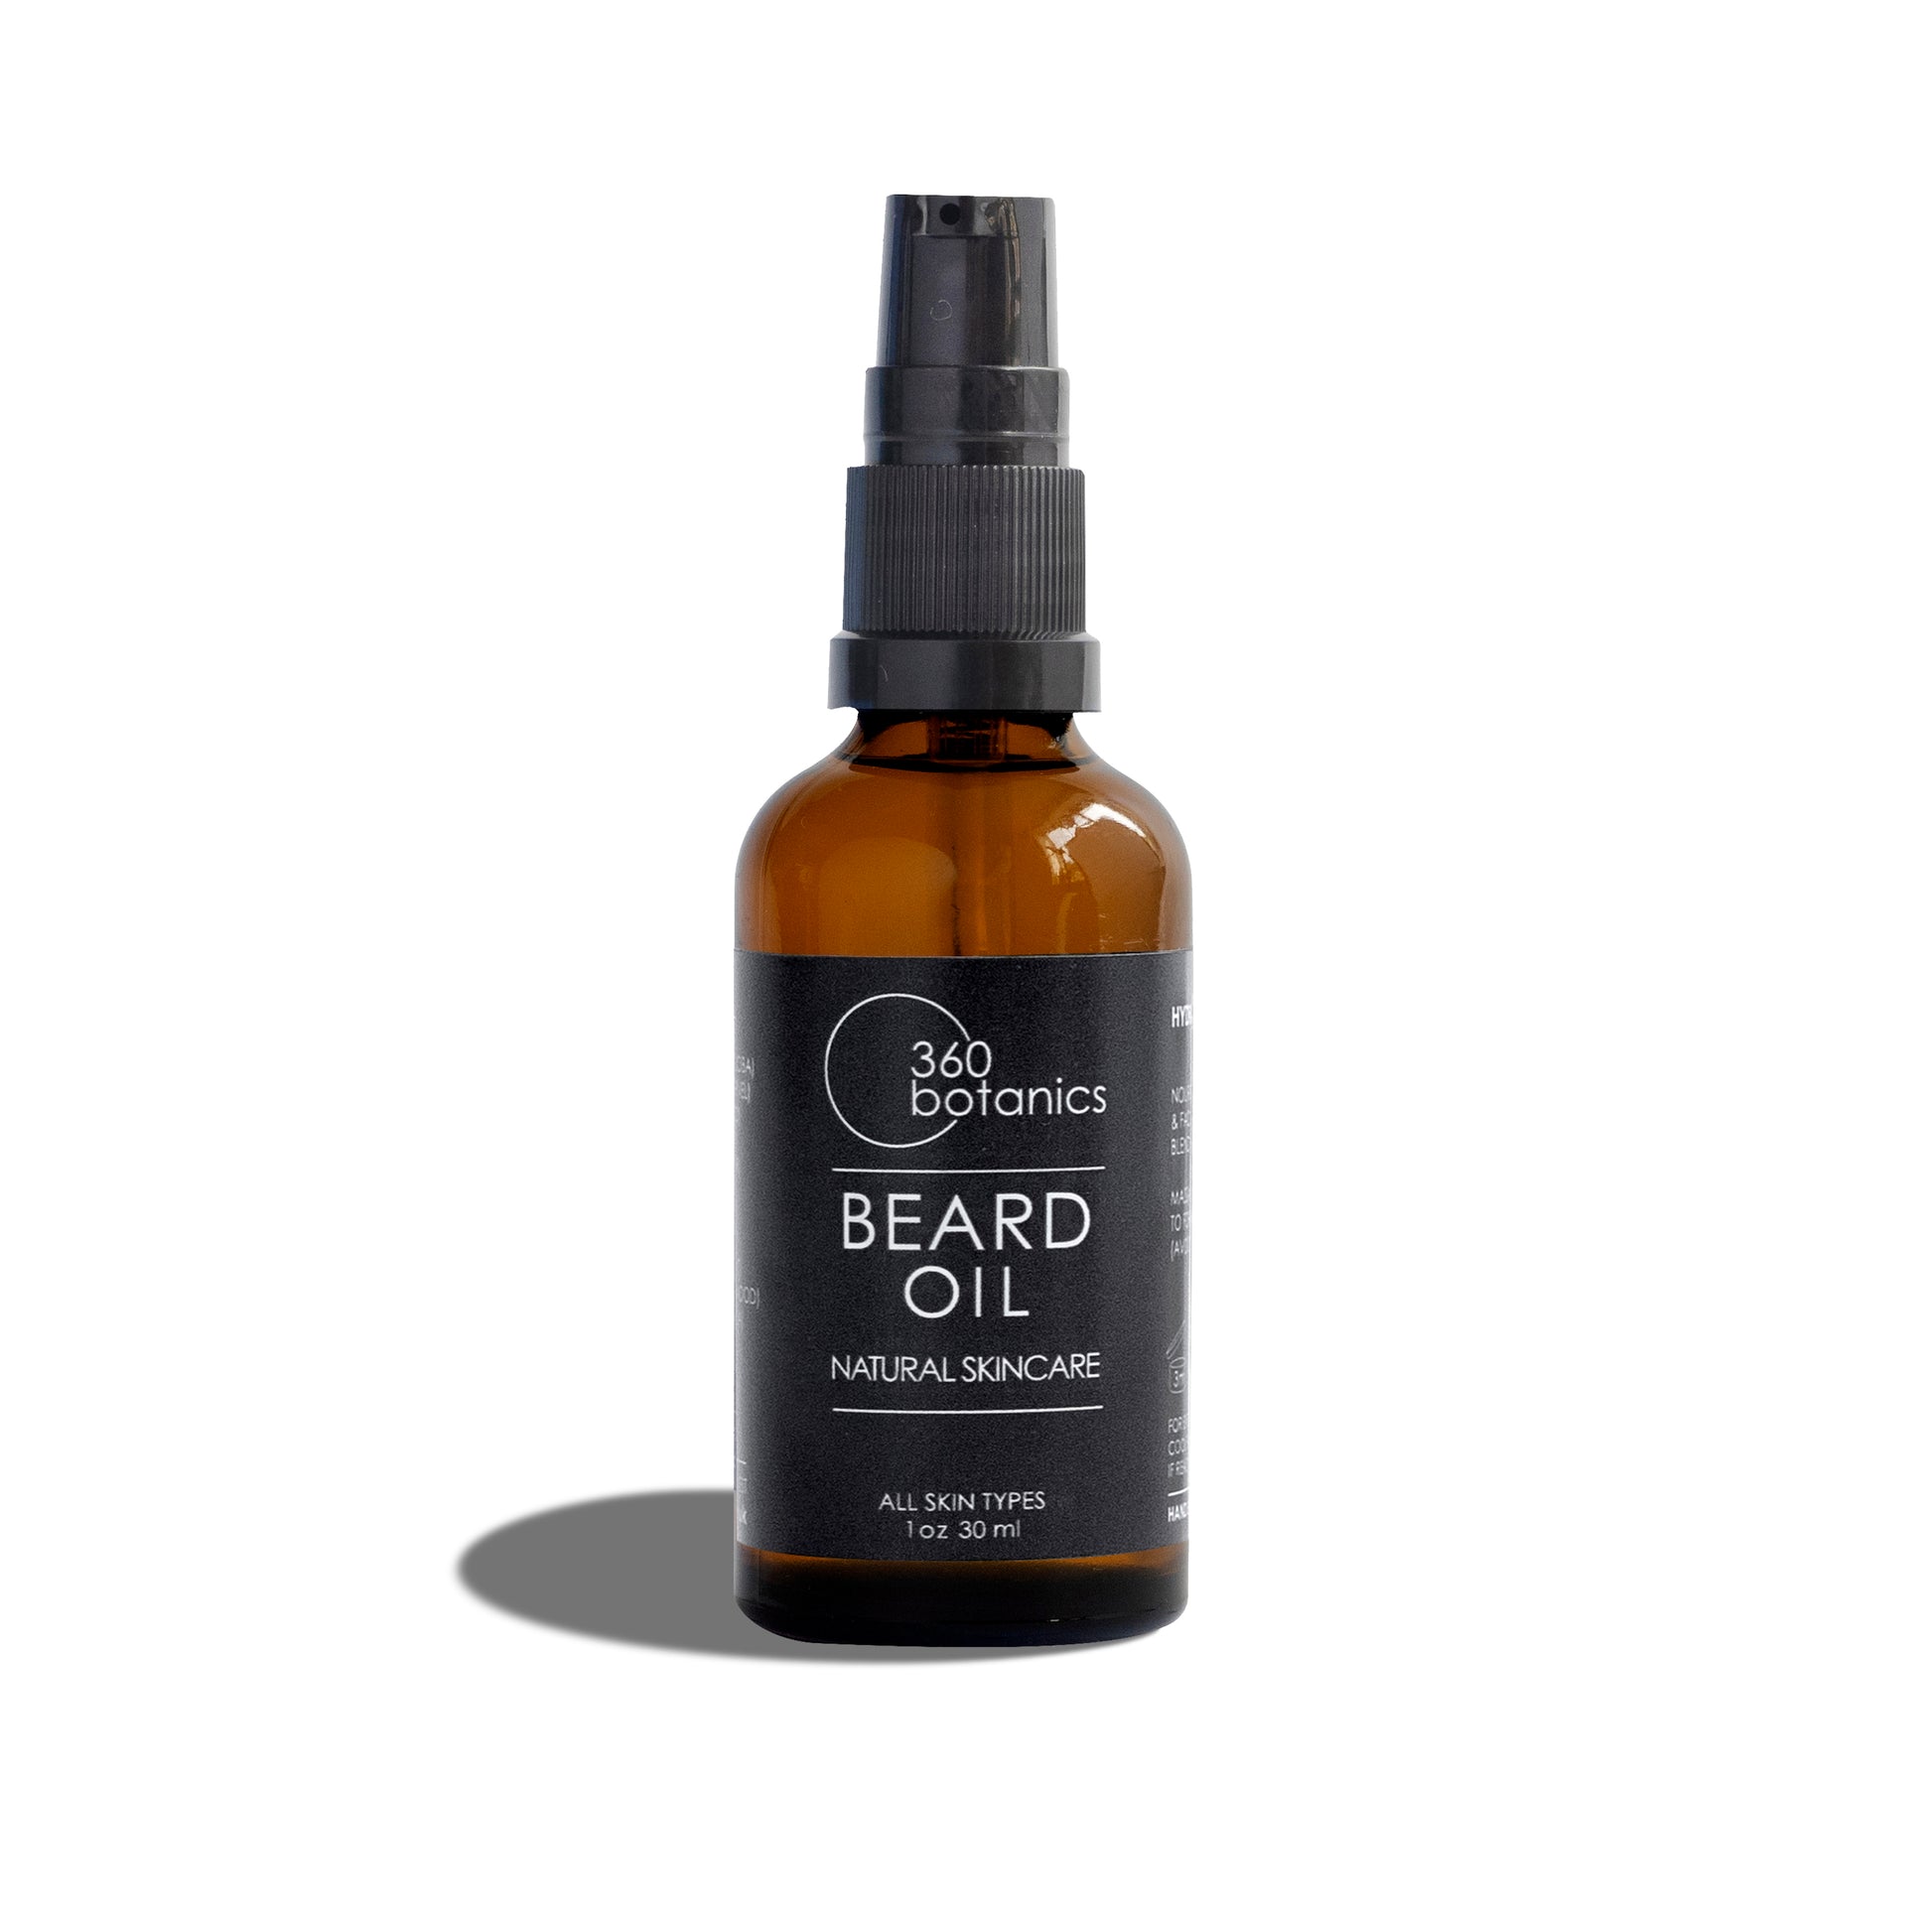 A 30 ml amber glass bottle of 360 Botanics Beard Oil with a black spray nozzle, prominently displayed against a white background. The label on the bottle indicates 'NATURAL SKINCARE' and 'ALL SKIN TYPES,' emphasising the product's suitability for a wide range of users and its natural ingredients